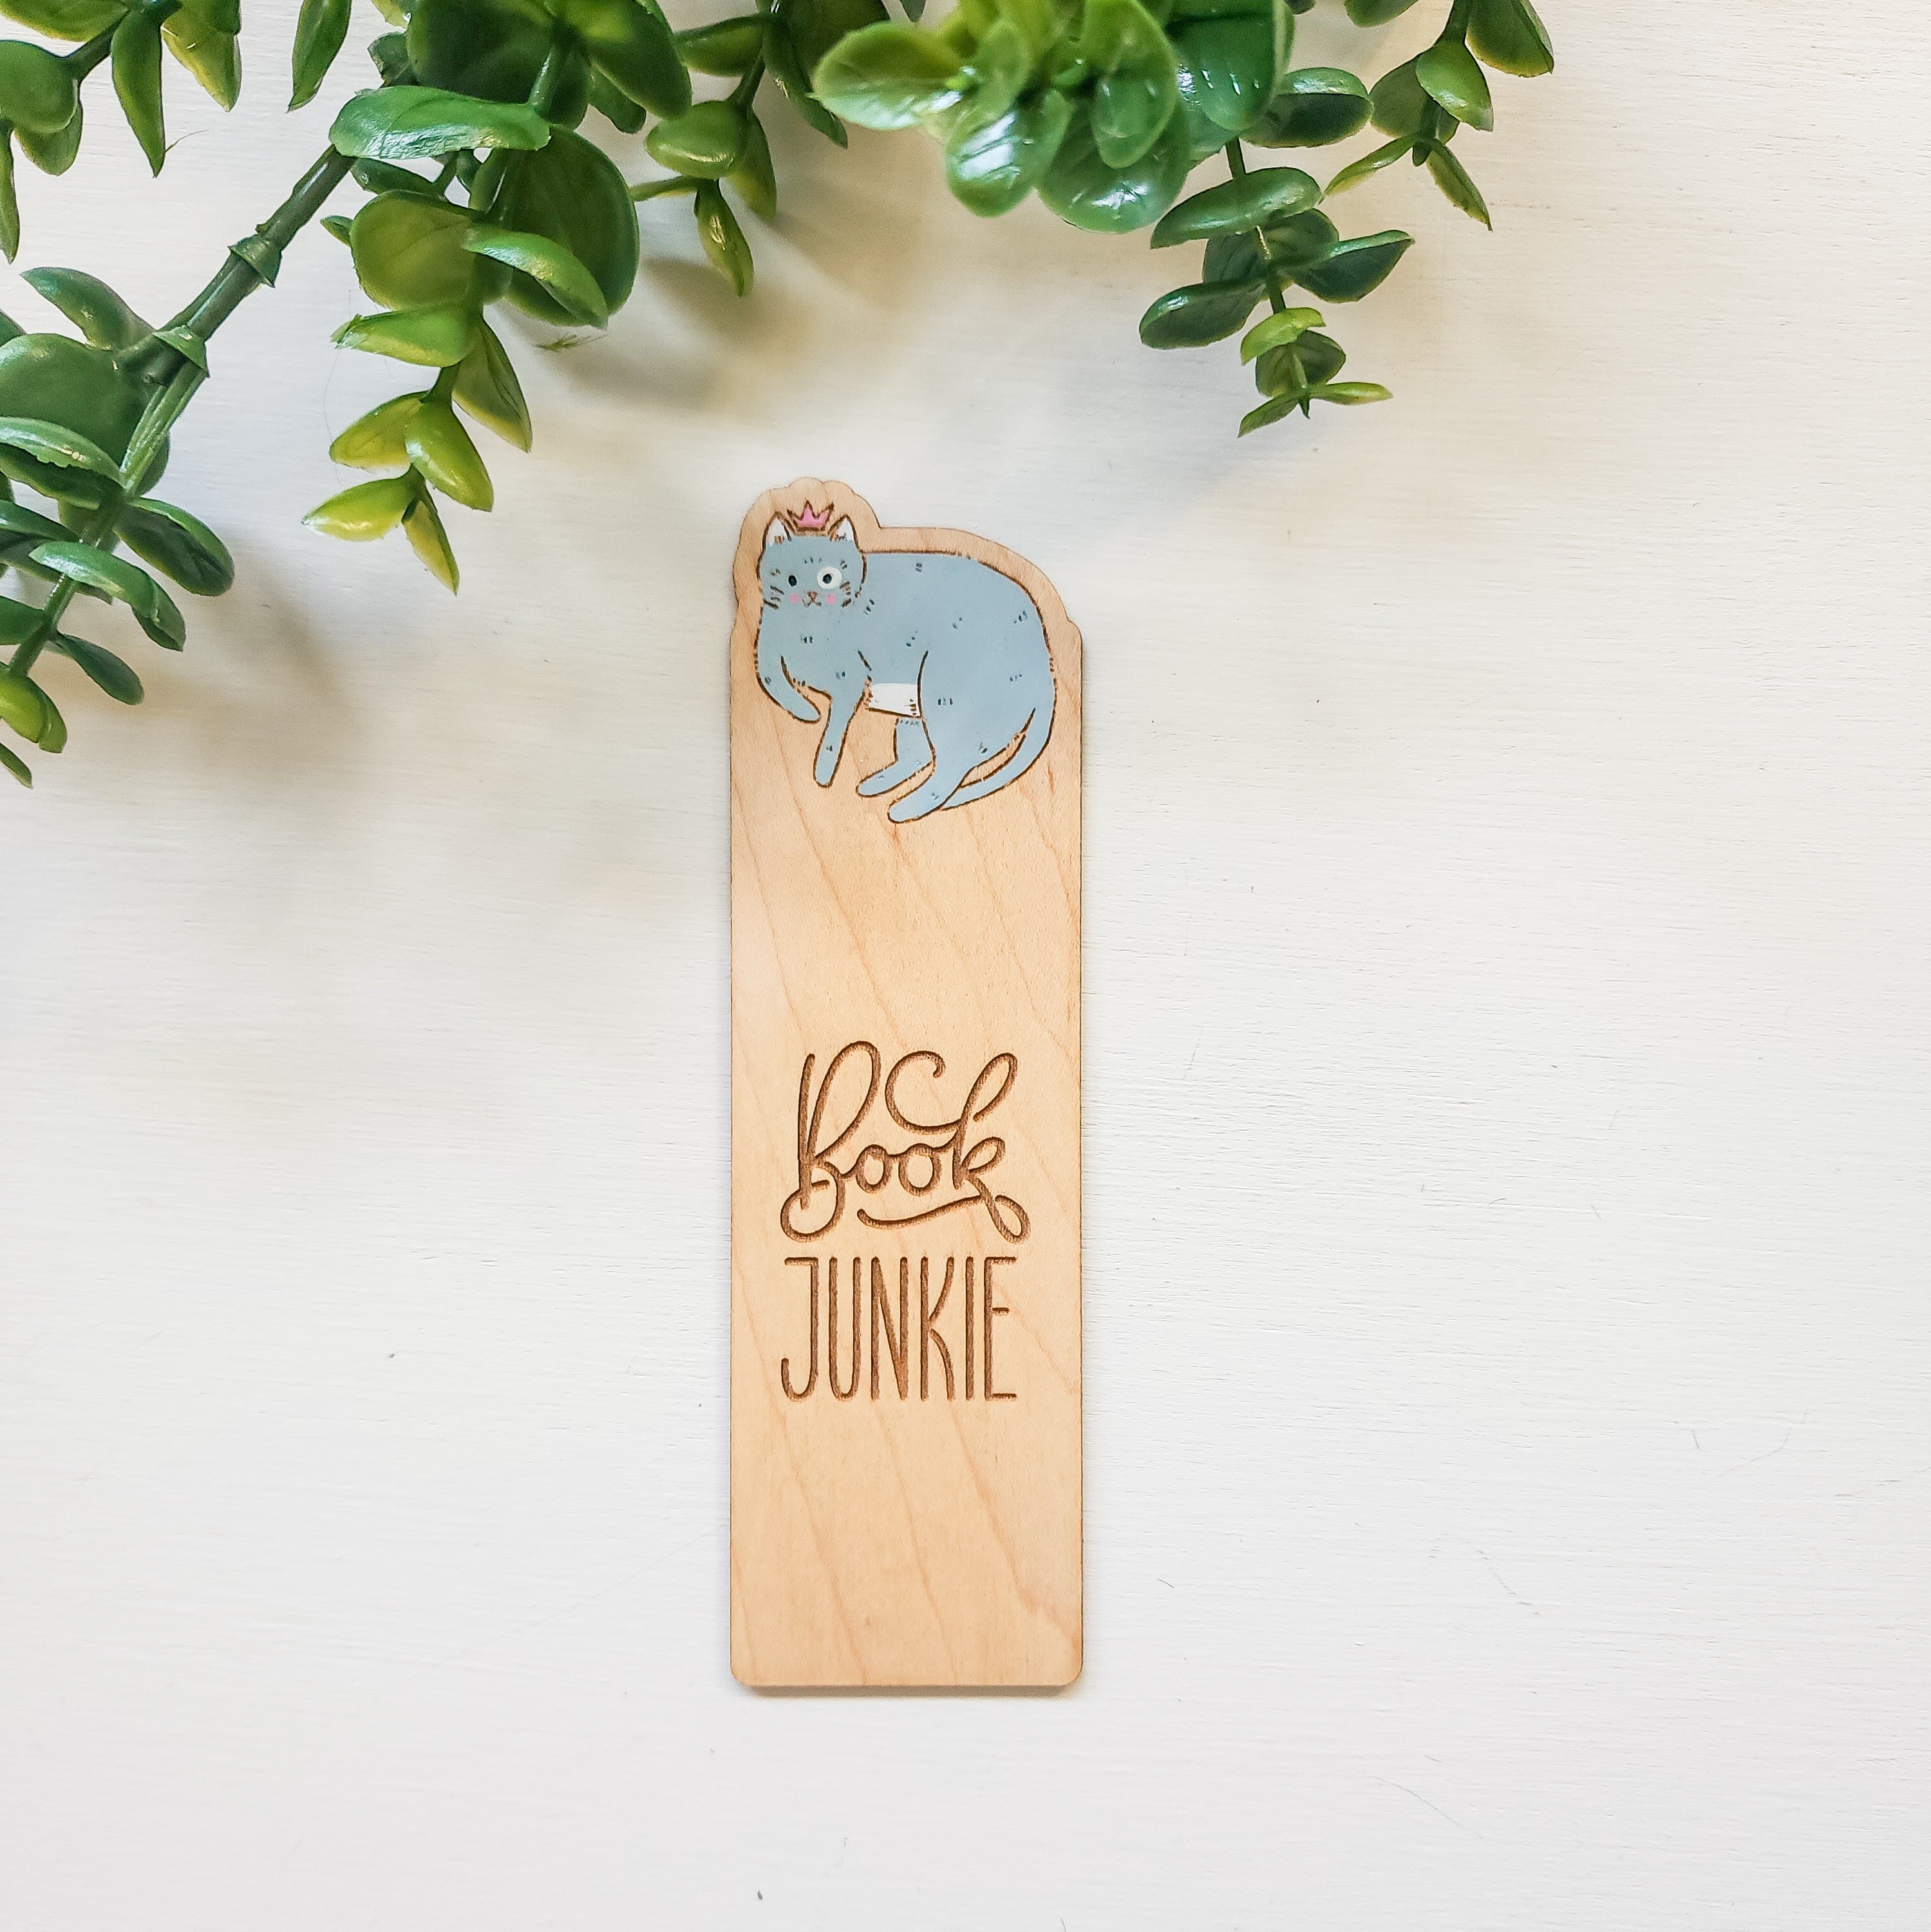 wooden book mark with a blue cat the the words book junkie engraved